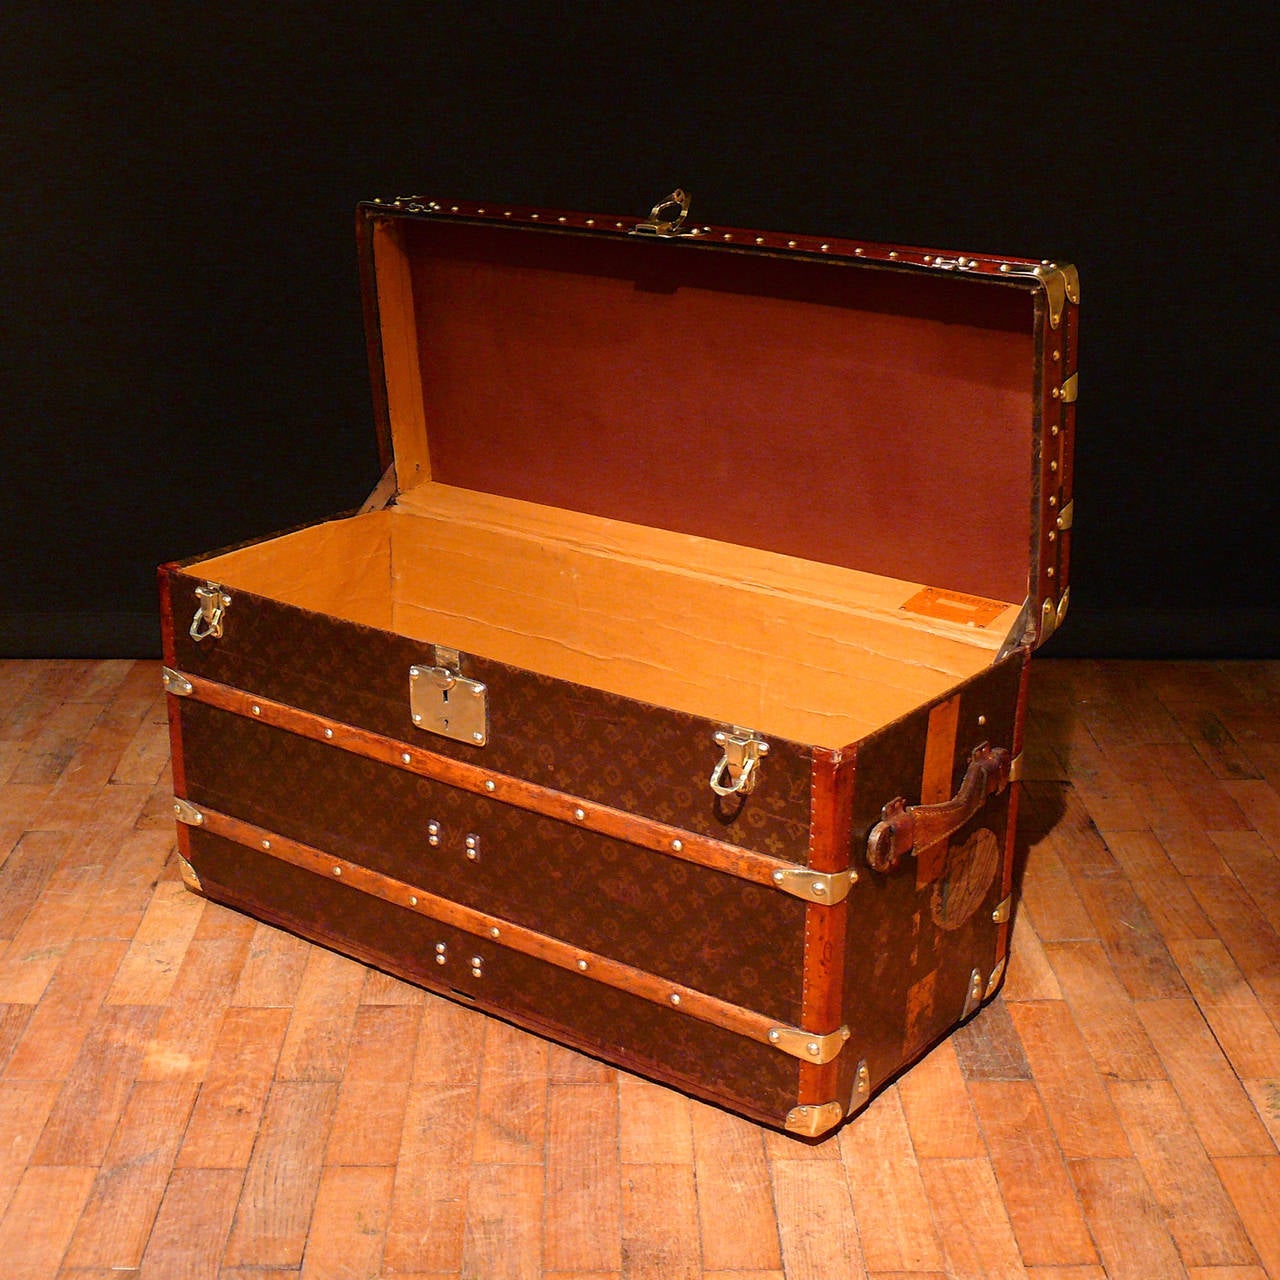 Delightful Louis Vuitton Shoe Trunk with Striped Livery, circa 1935 2